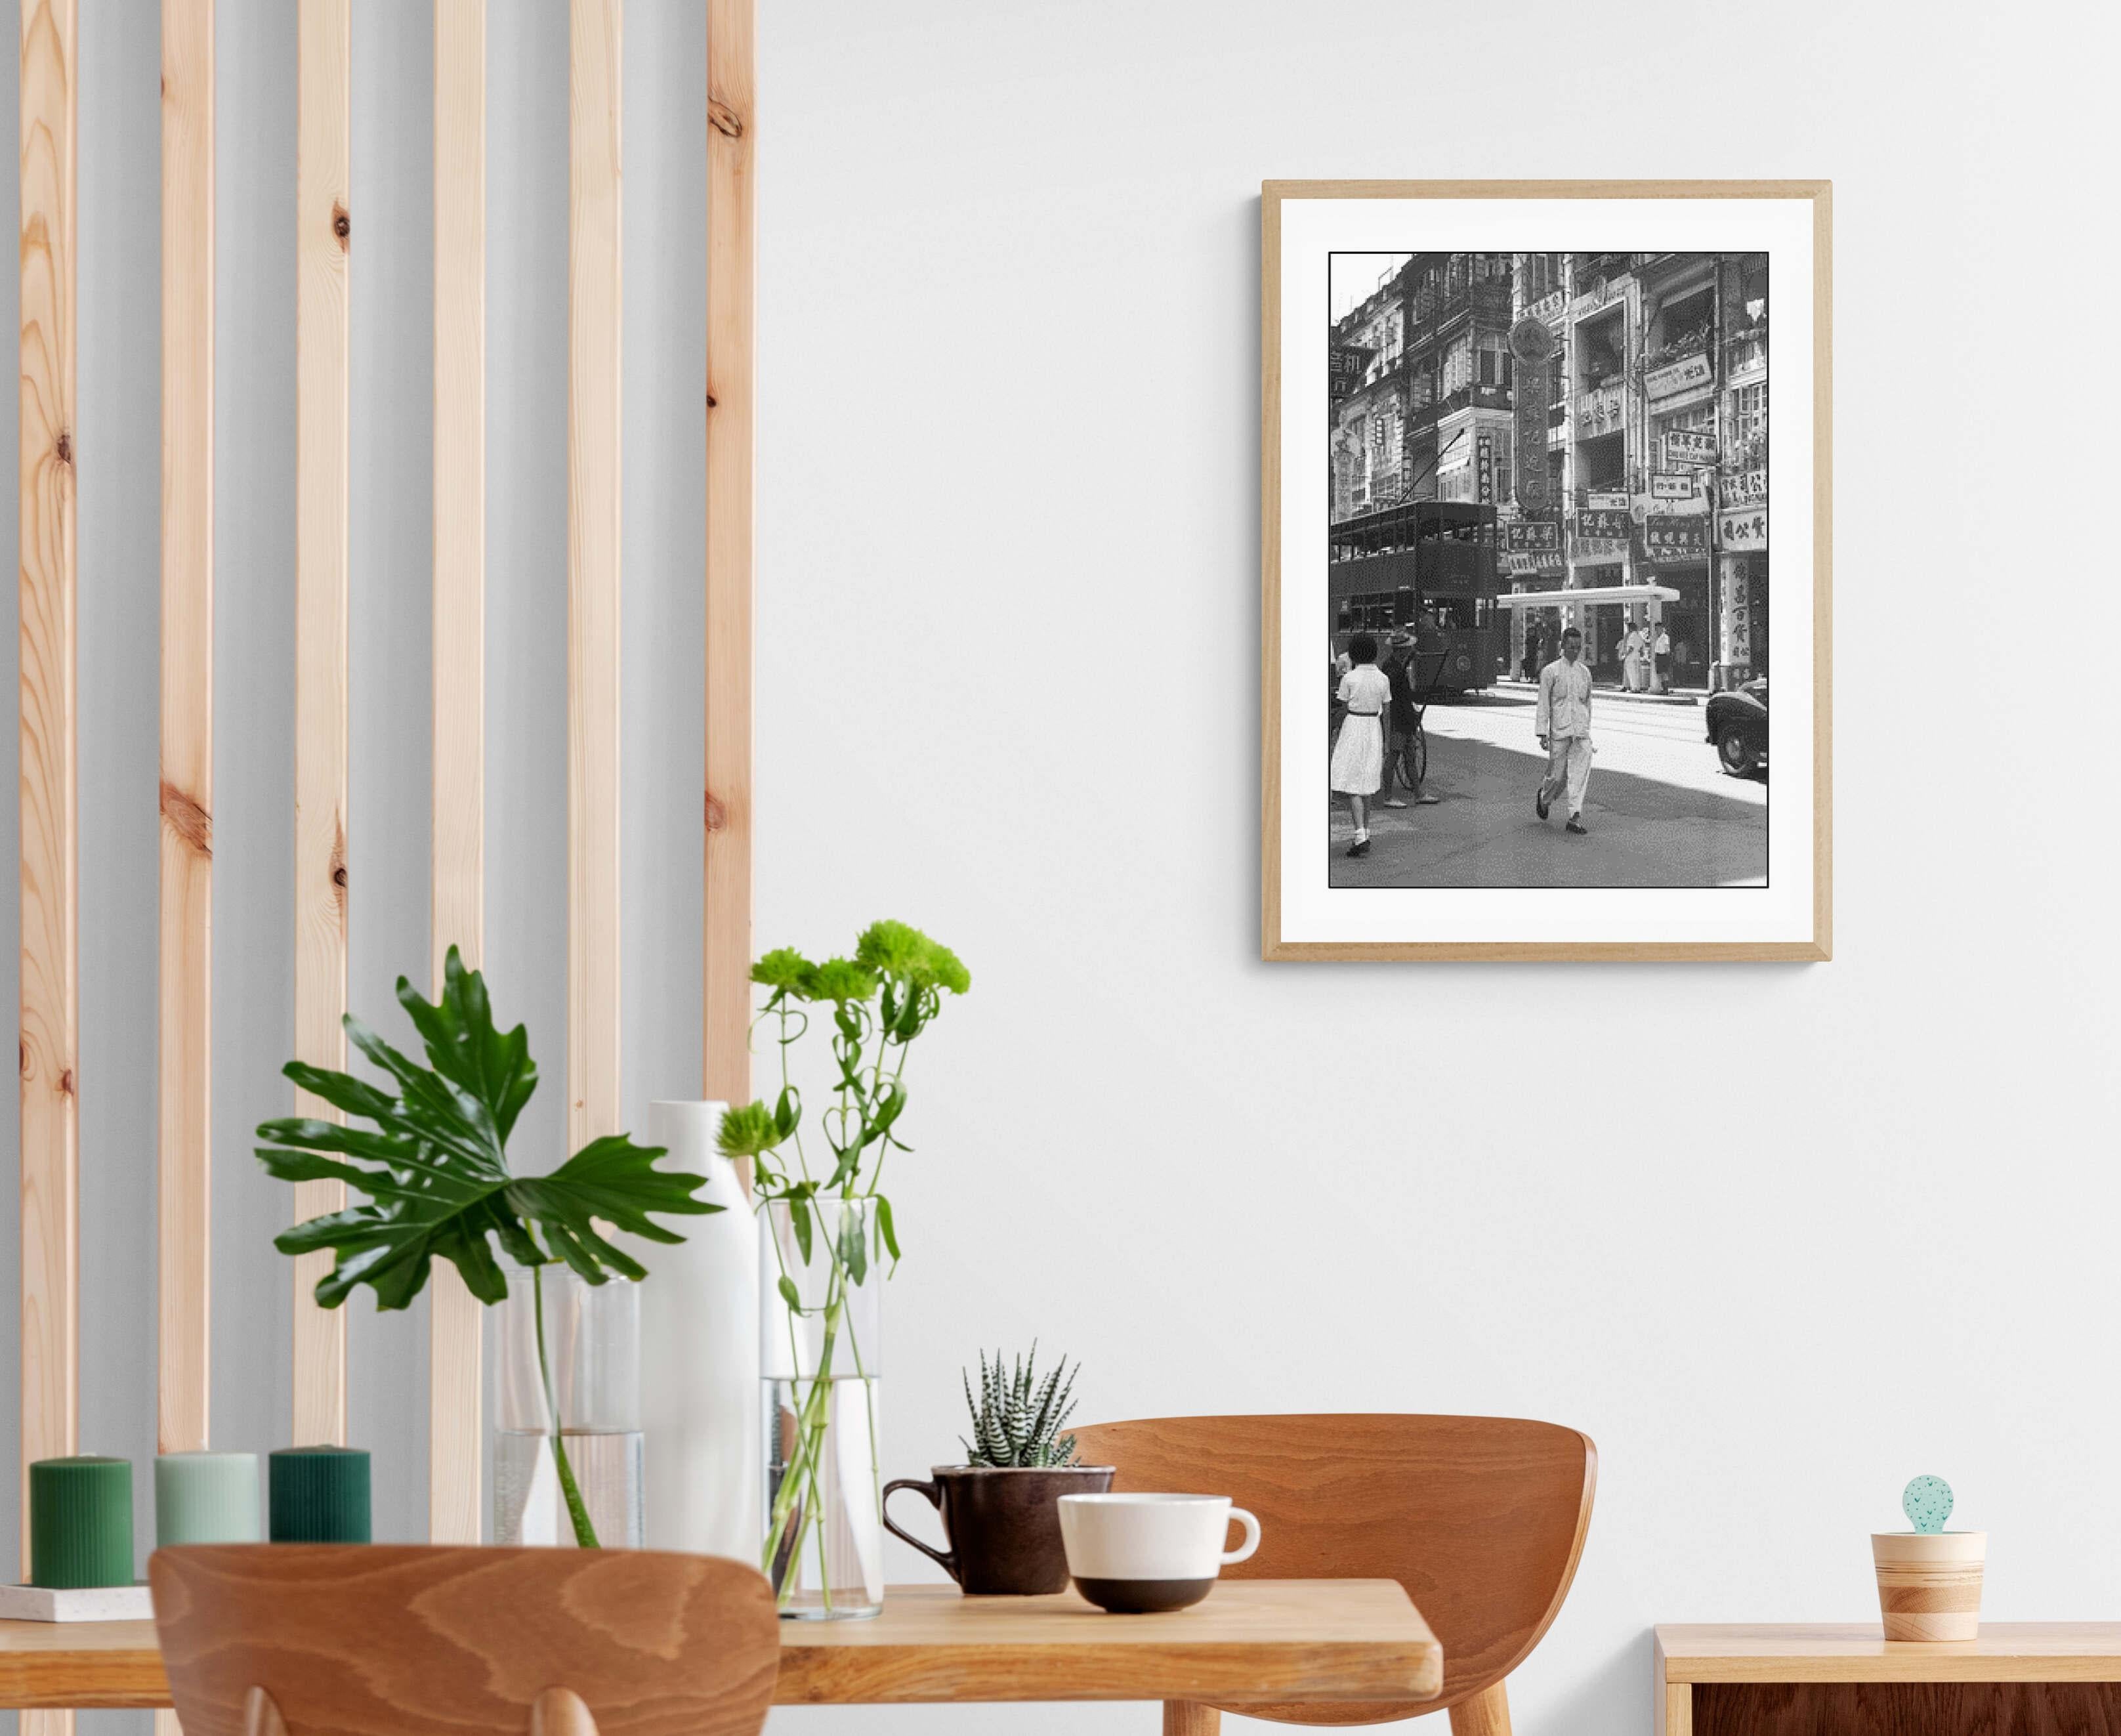 Artwork # 1 on 5 sold in limited edition in perfect condition 
Tradizioni scomparse, Hong Kong
This photo was made in 1958, the negative was digitized during the artist's lifetime and the technical parameters (framing, contrast, light, etc.) was